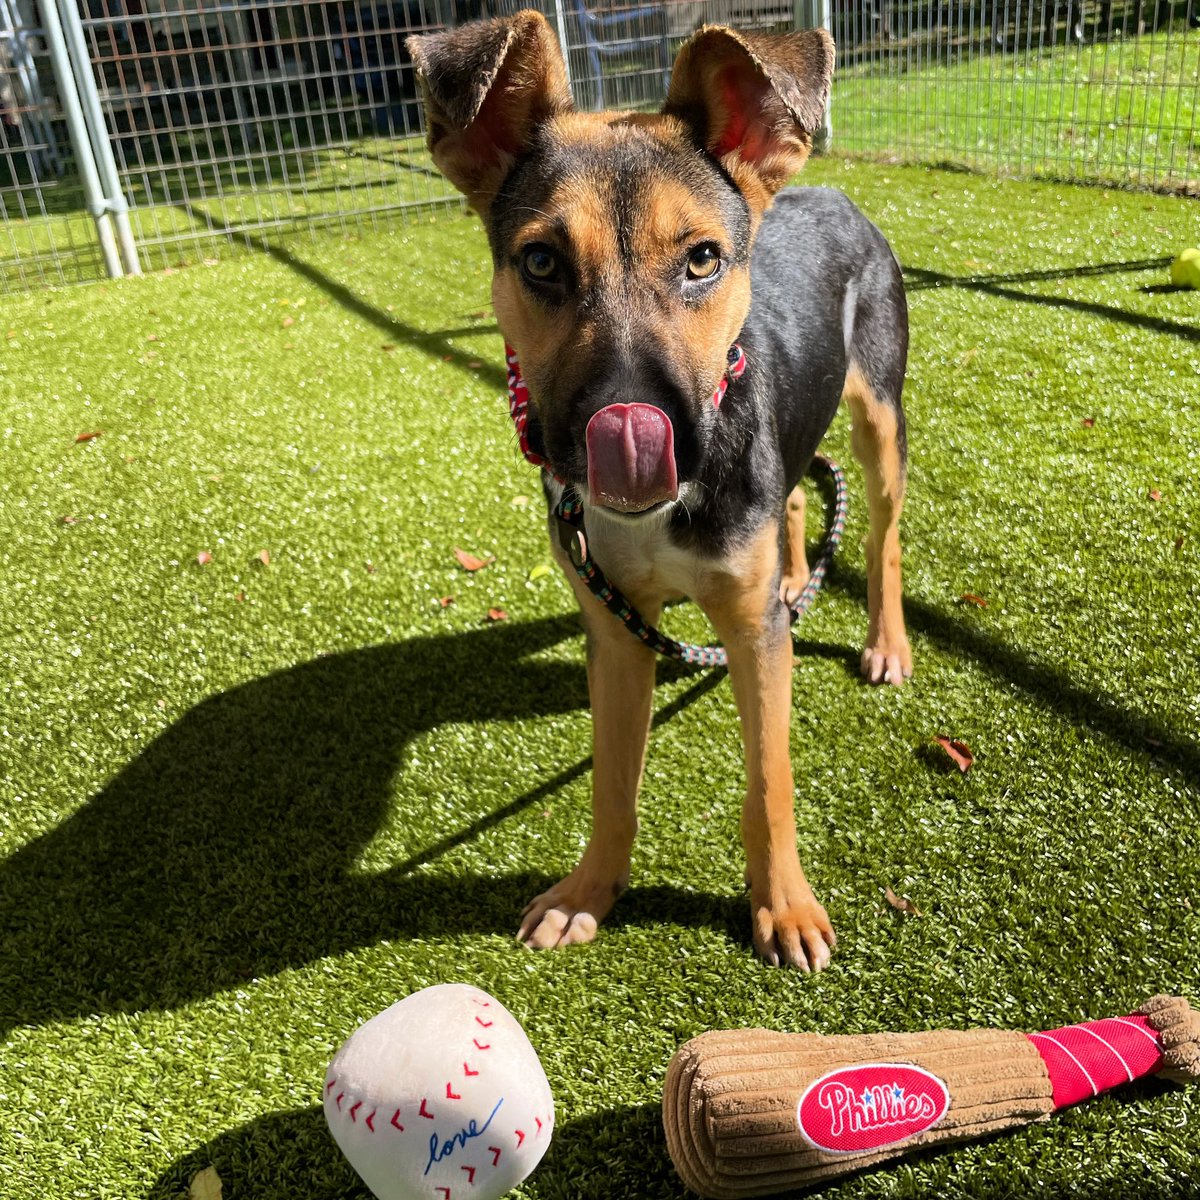 Jack is rooting for the home team ⚾️ 🐶 Red Barktober Adoption Special: All dog adoption fees for dogs like Jack are reduced 50% today through Sunday! That includes puppies, too!